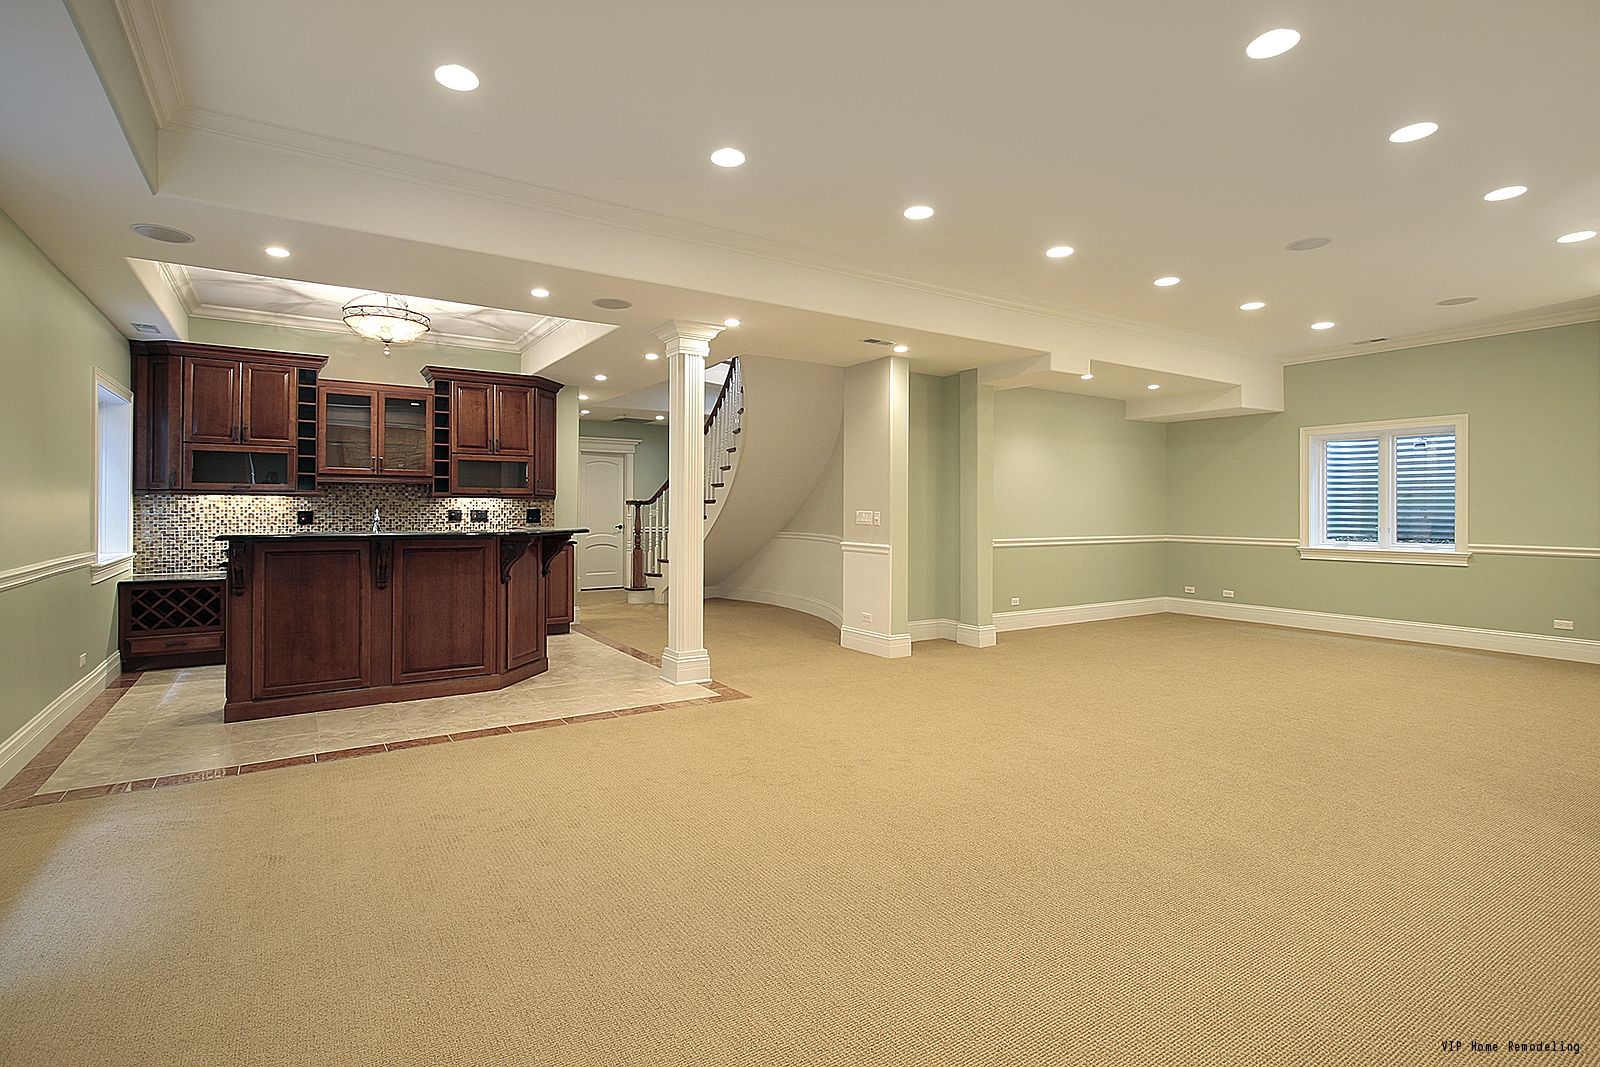 The Potential Below: Maximizing The Use Of Your Basement